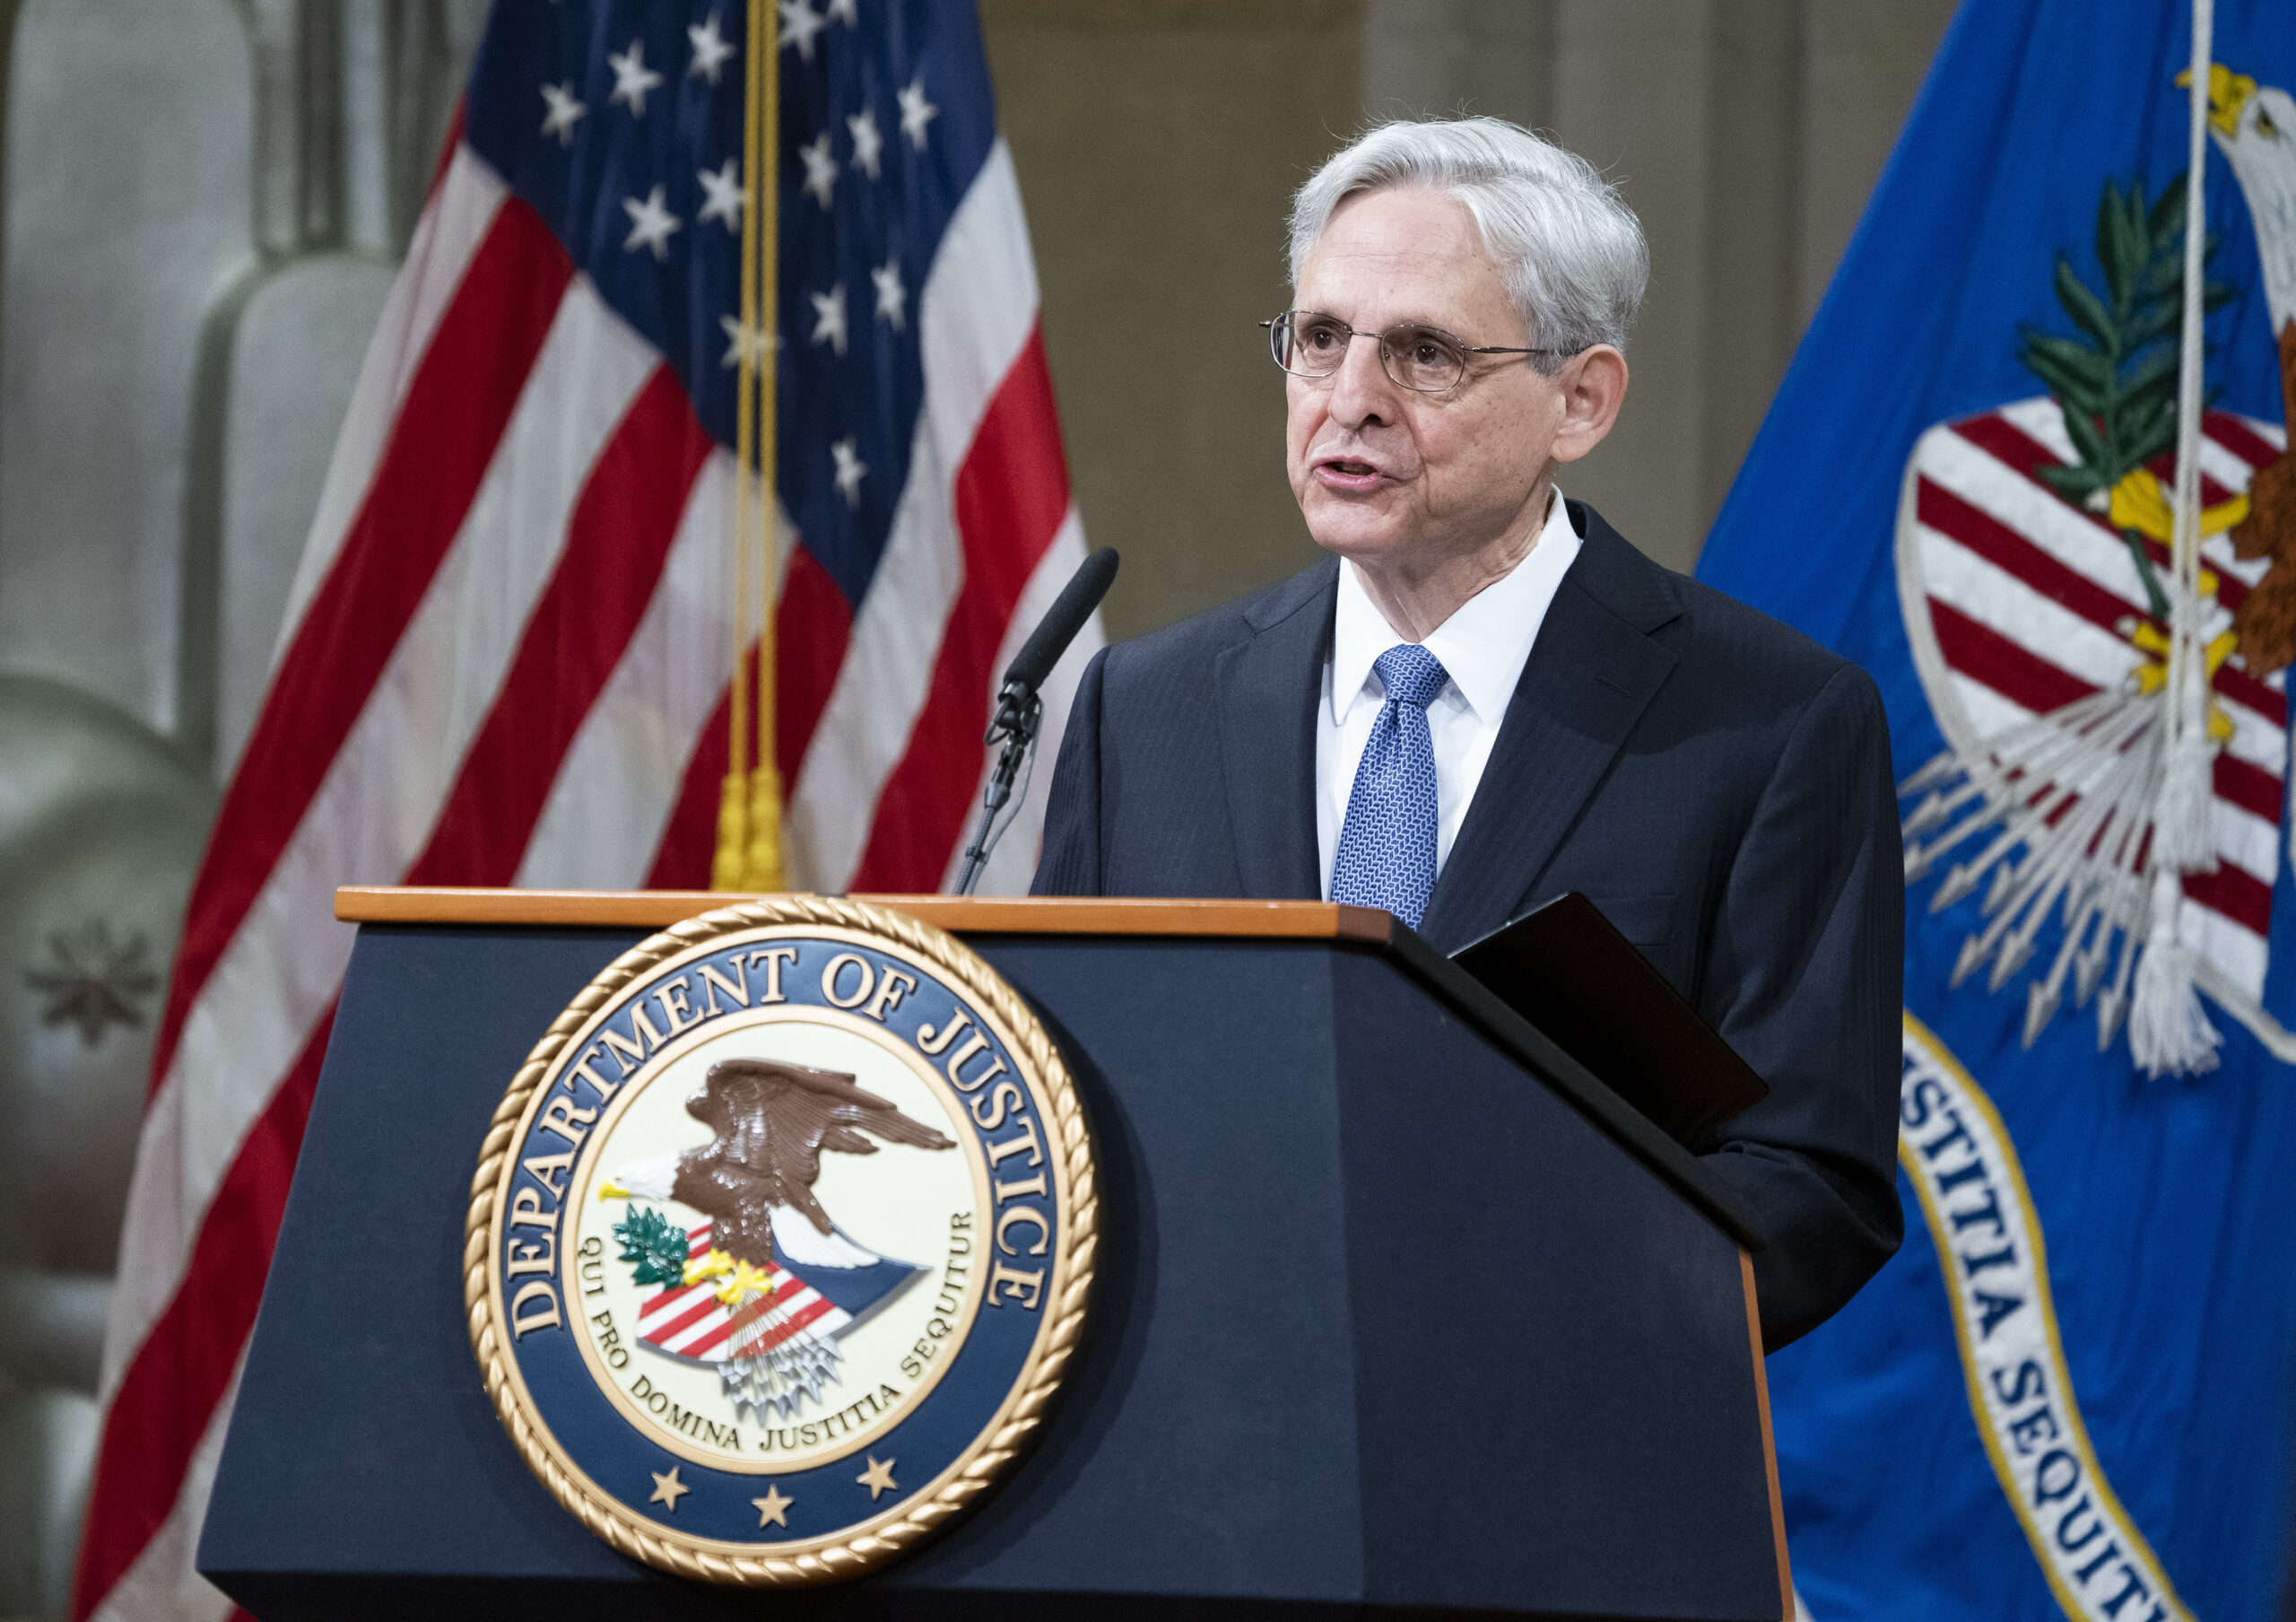 President Joe Biden's pick for attorney general Merrick Garland, addresses staff on his first day at the Department of Justice, Thursday, March 11, 2021, in Washington. Garland, a one time Supreme Court nominee under President Obama, was confirmed Wednesday by a Senate and will be sworn in later today. (Kevin Dietsch/Pool via AP)